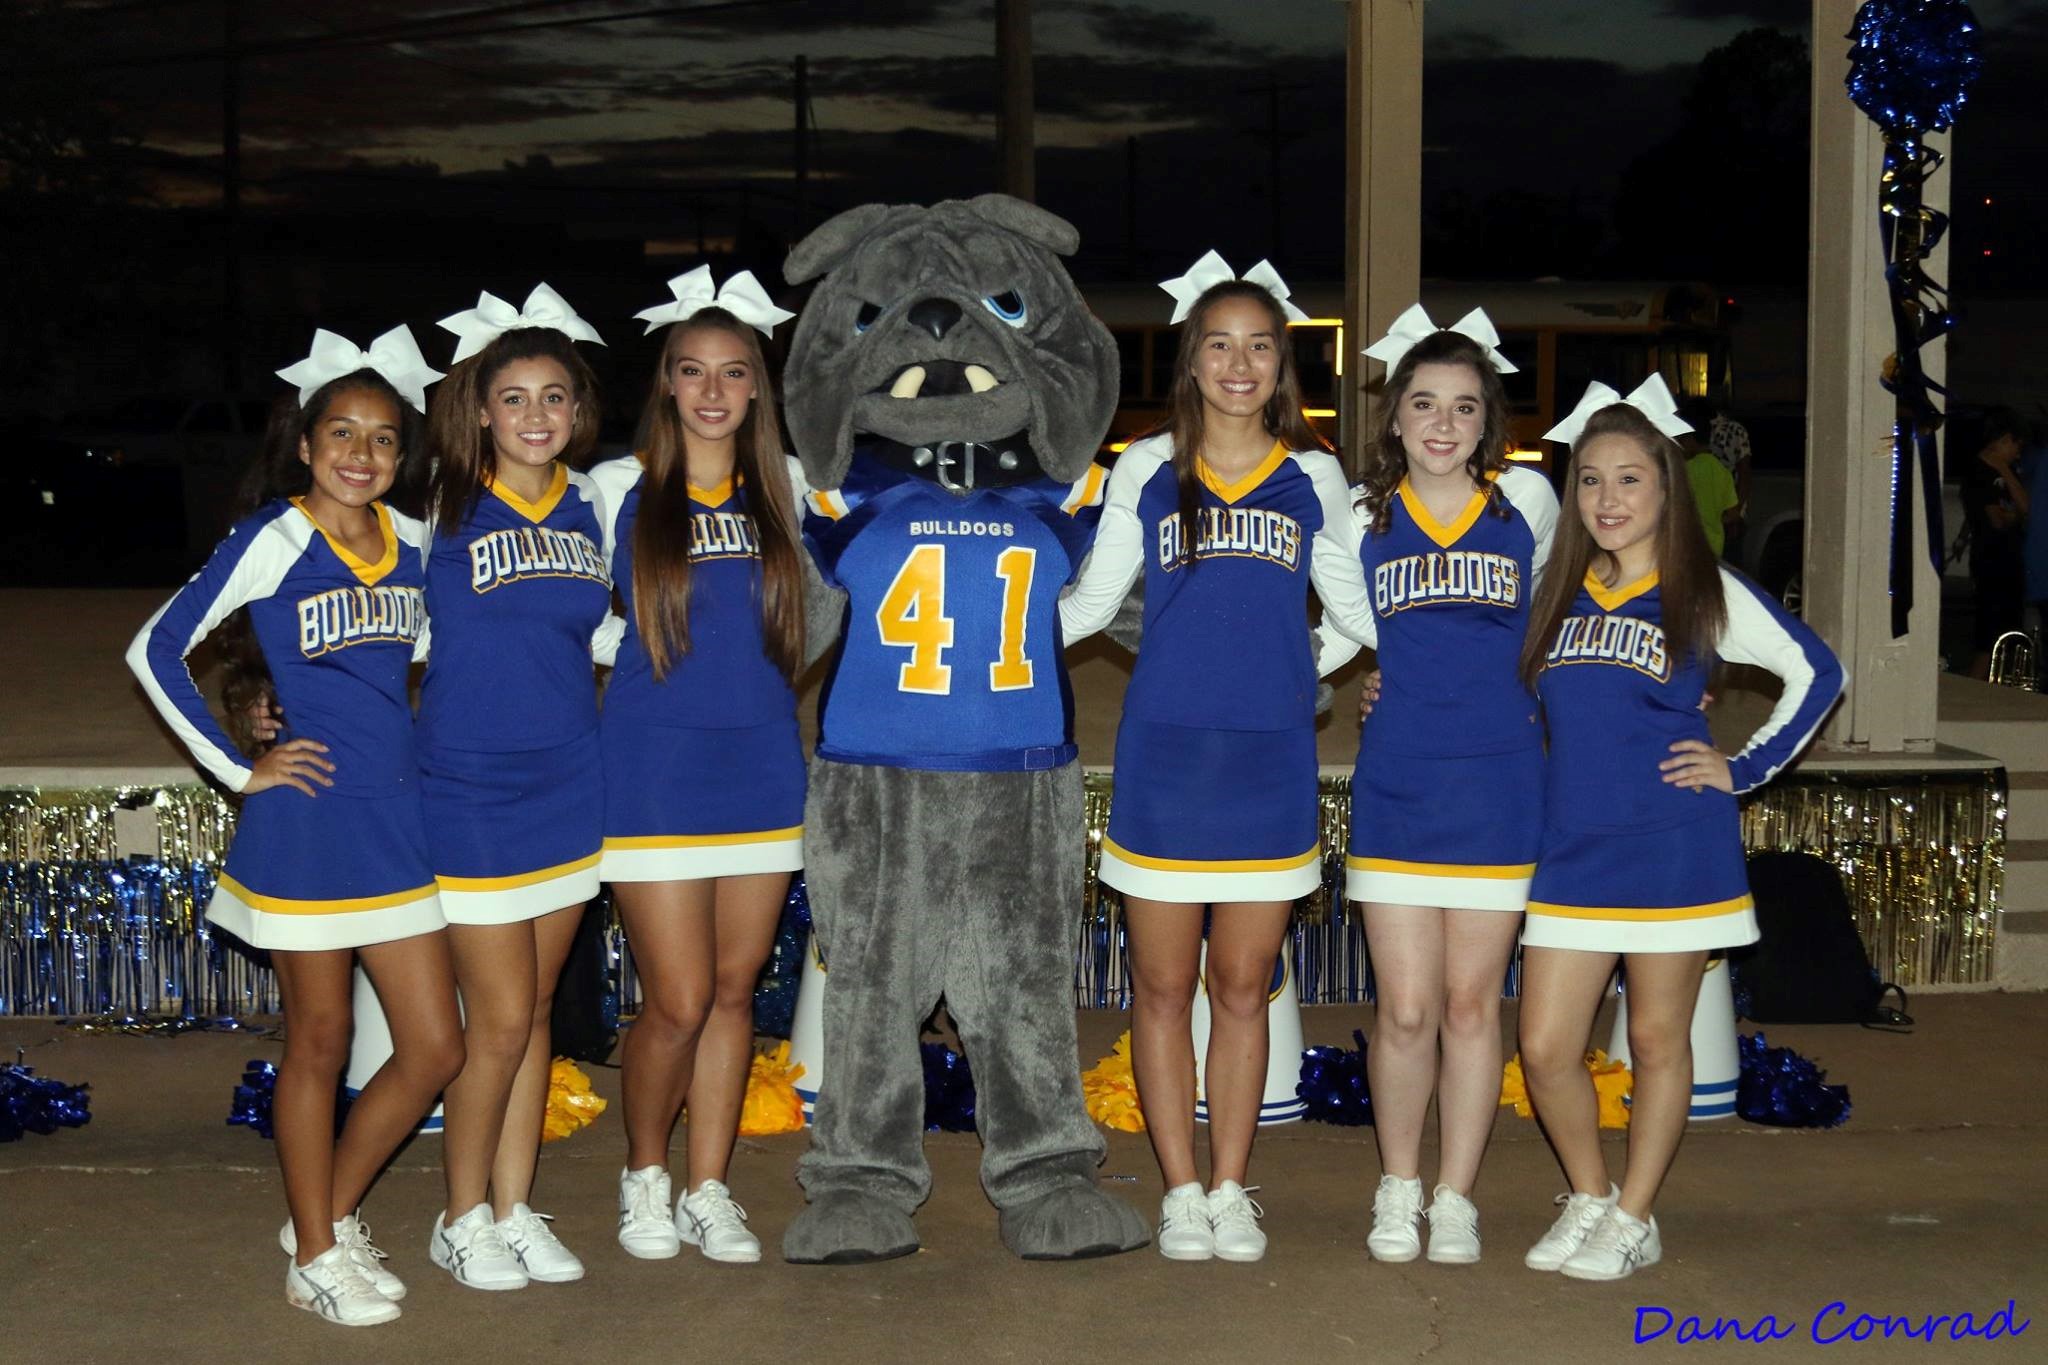 The cheerleaders all posing with the school's mascot.